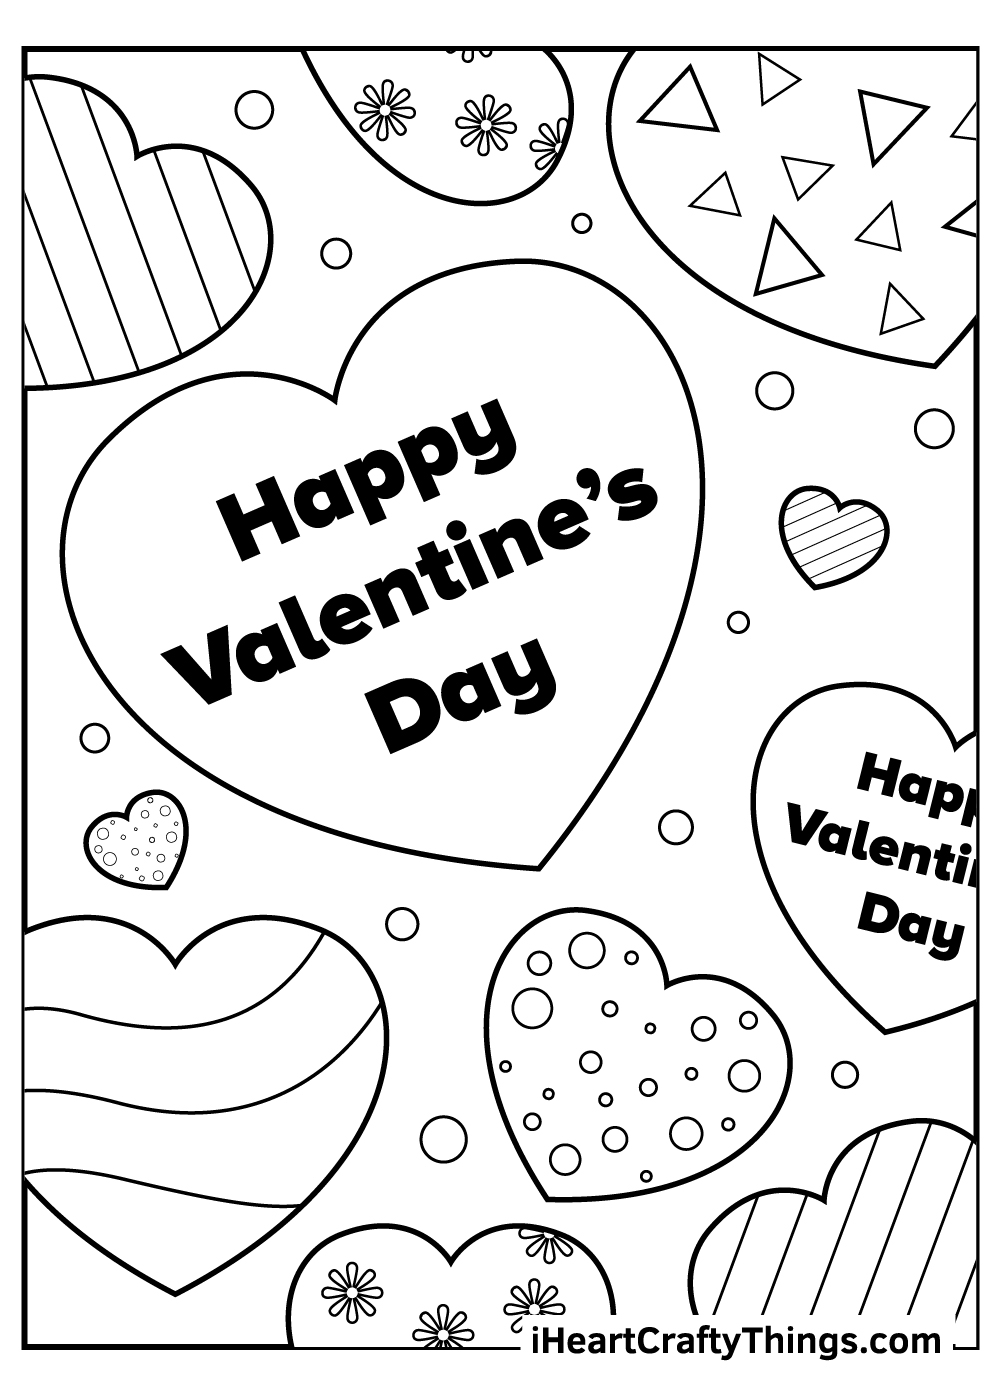 St Valentine s Day Coloring Pages Updated 2021 